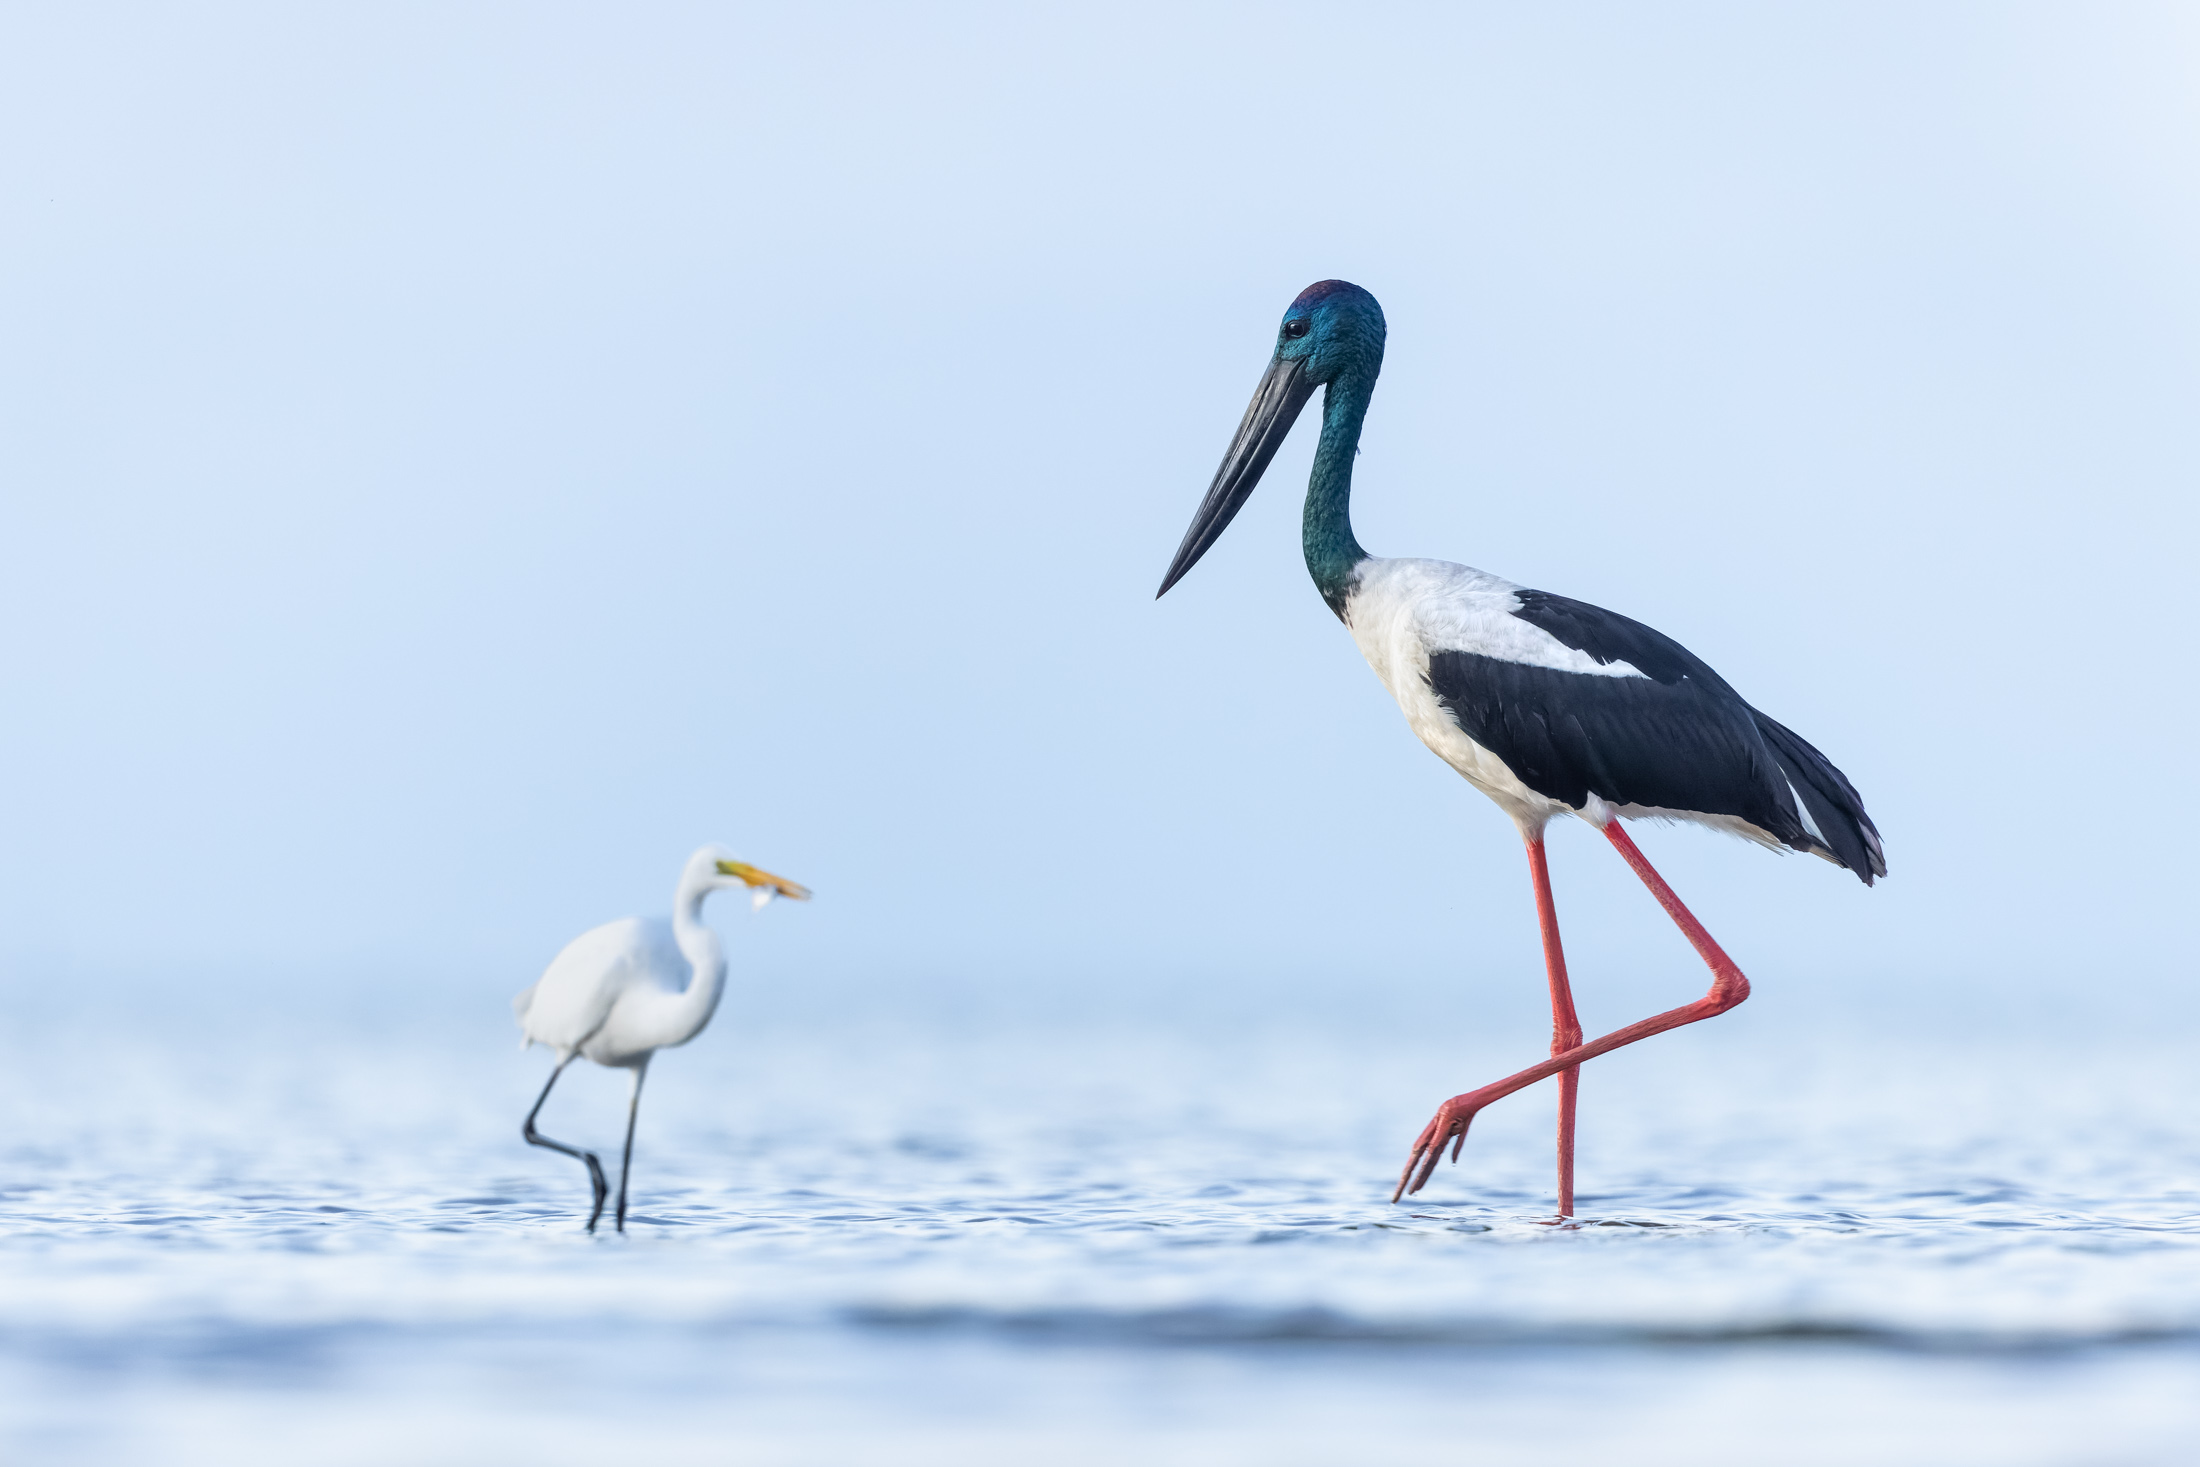 To the right of the frame, a Black-necked Stork is wading in water against a blue background. Behind it, an out of focus Great Egret is also wading with a fish in its beak. Both birds have one leg raised.